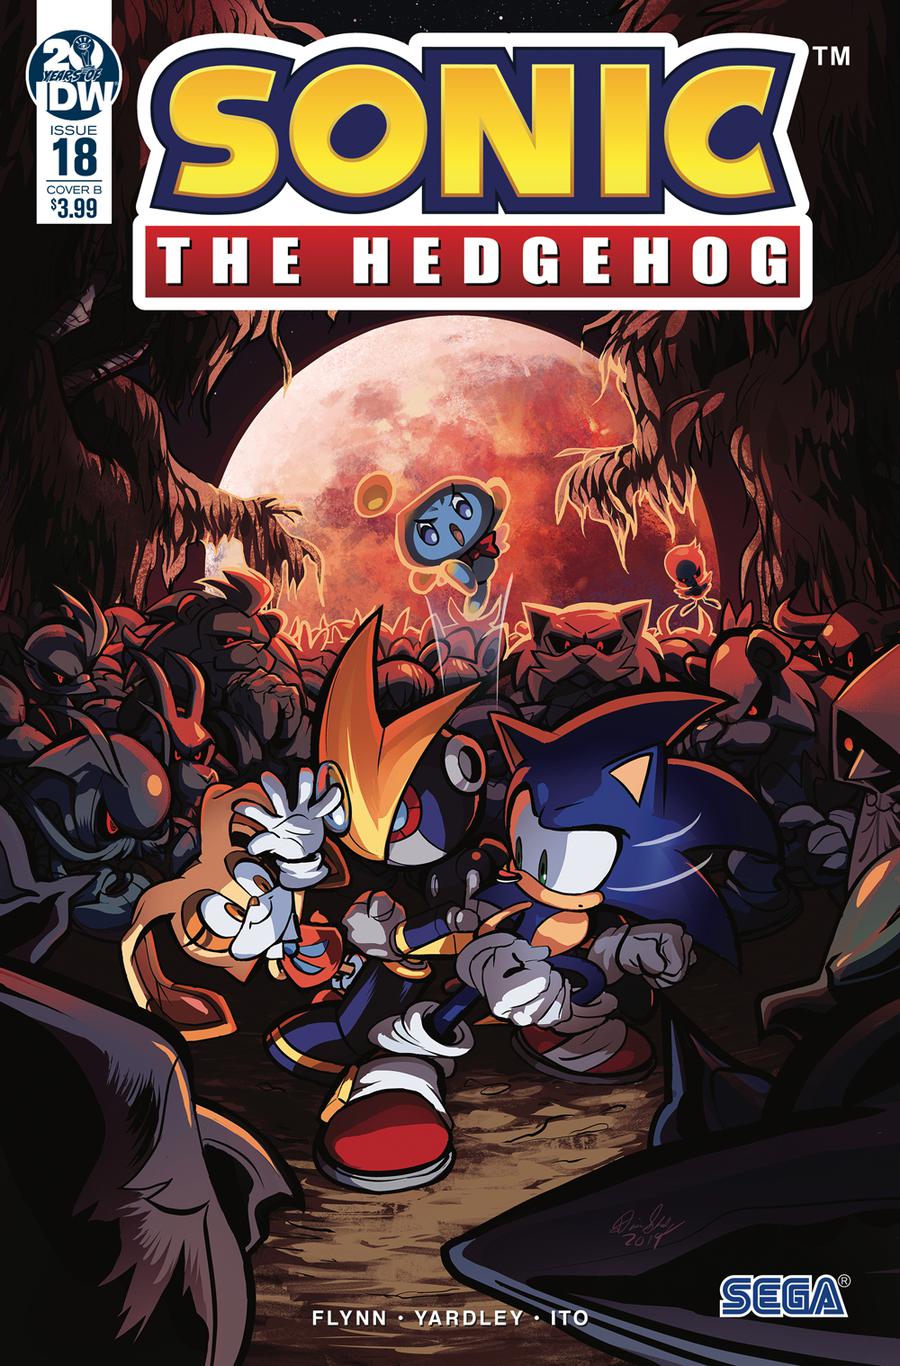 Sonic The Hedgehog Vol 3 #18 Cover B Variant Diana Skelly Cover